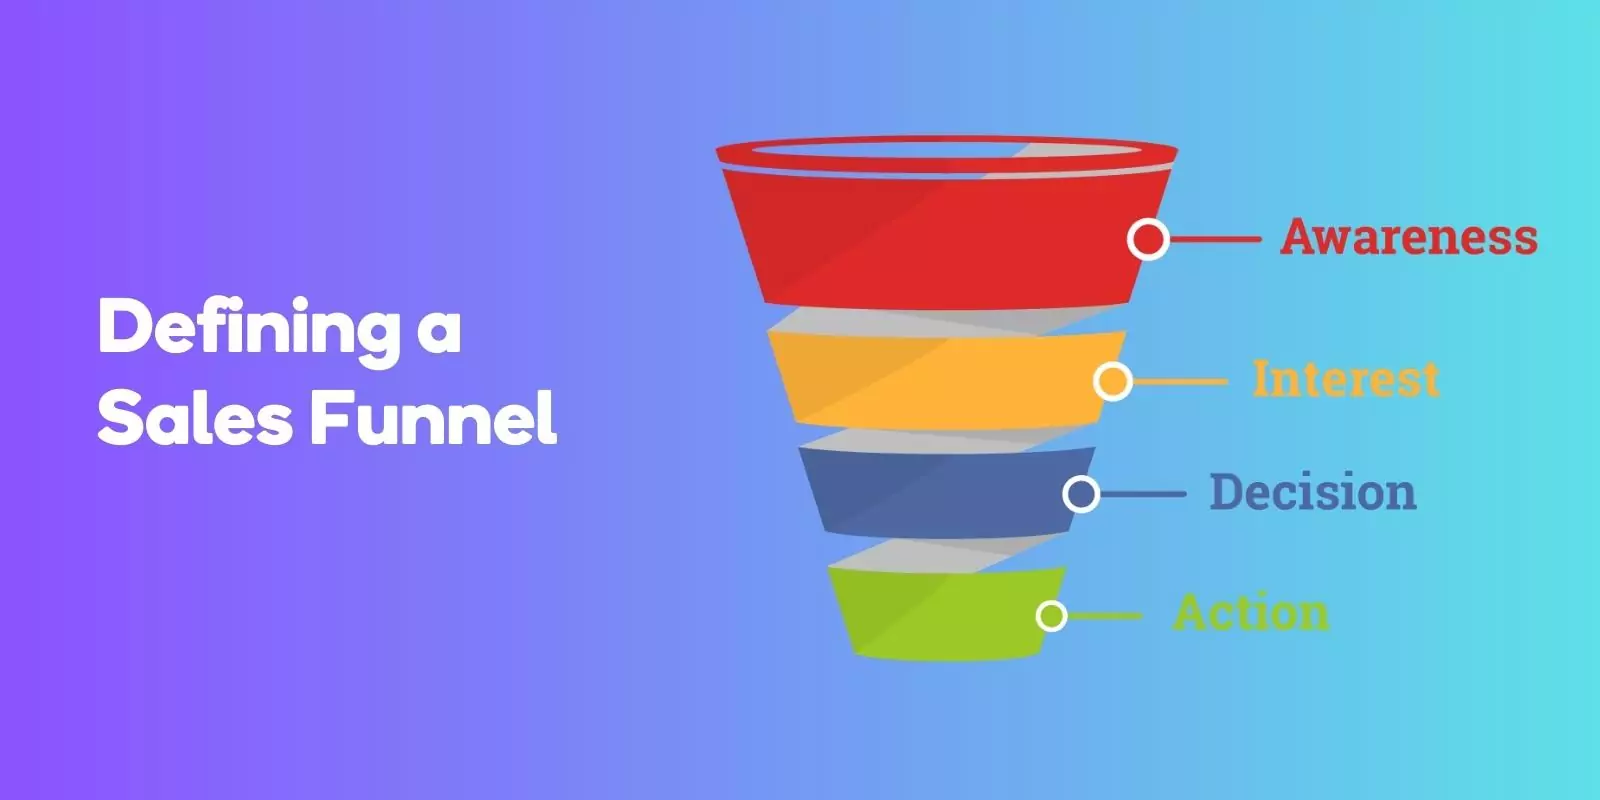 Defining a Sales Funnel